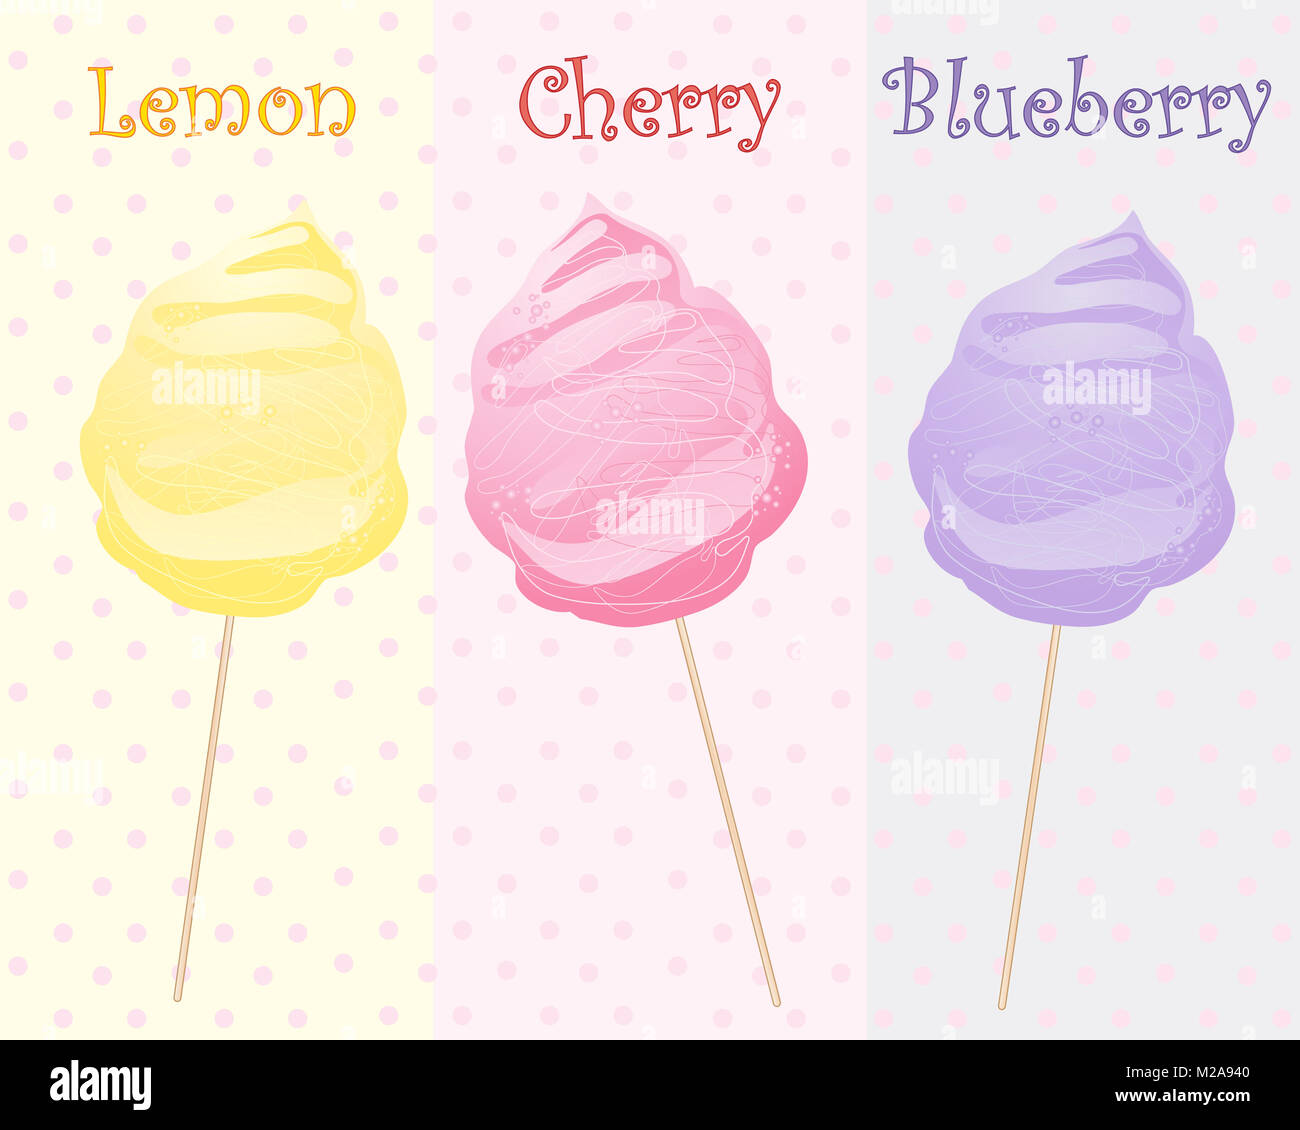 an illustration of cotton candy on sticks in fruity lemon cherry and blueberry flavors on a colorful background Stock Photo